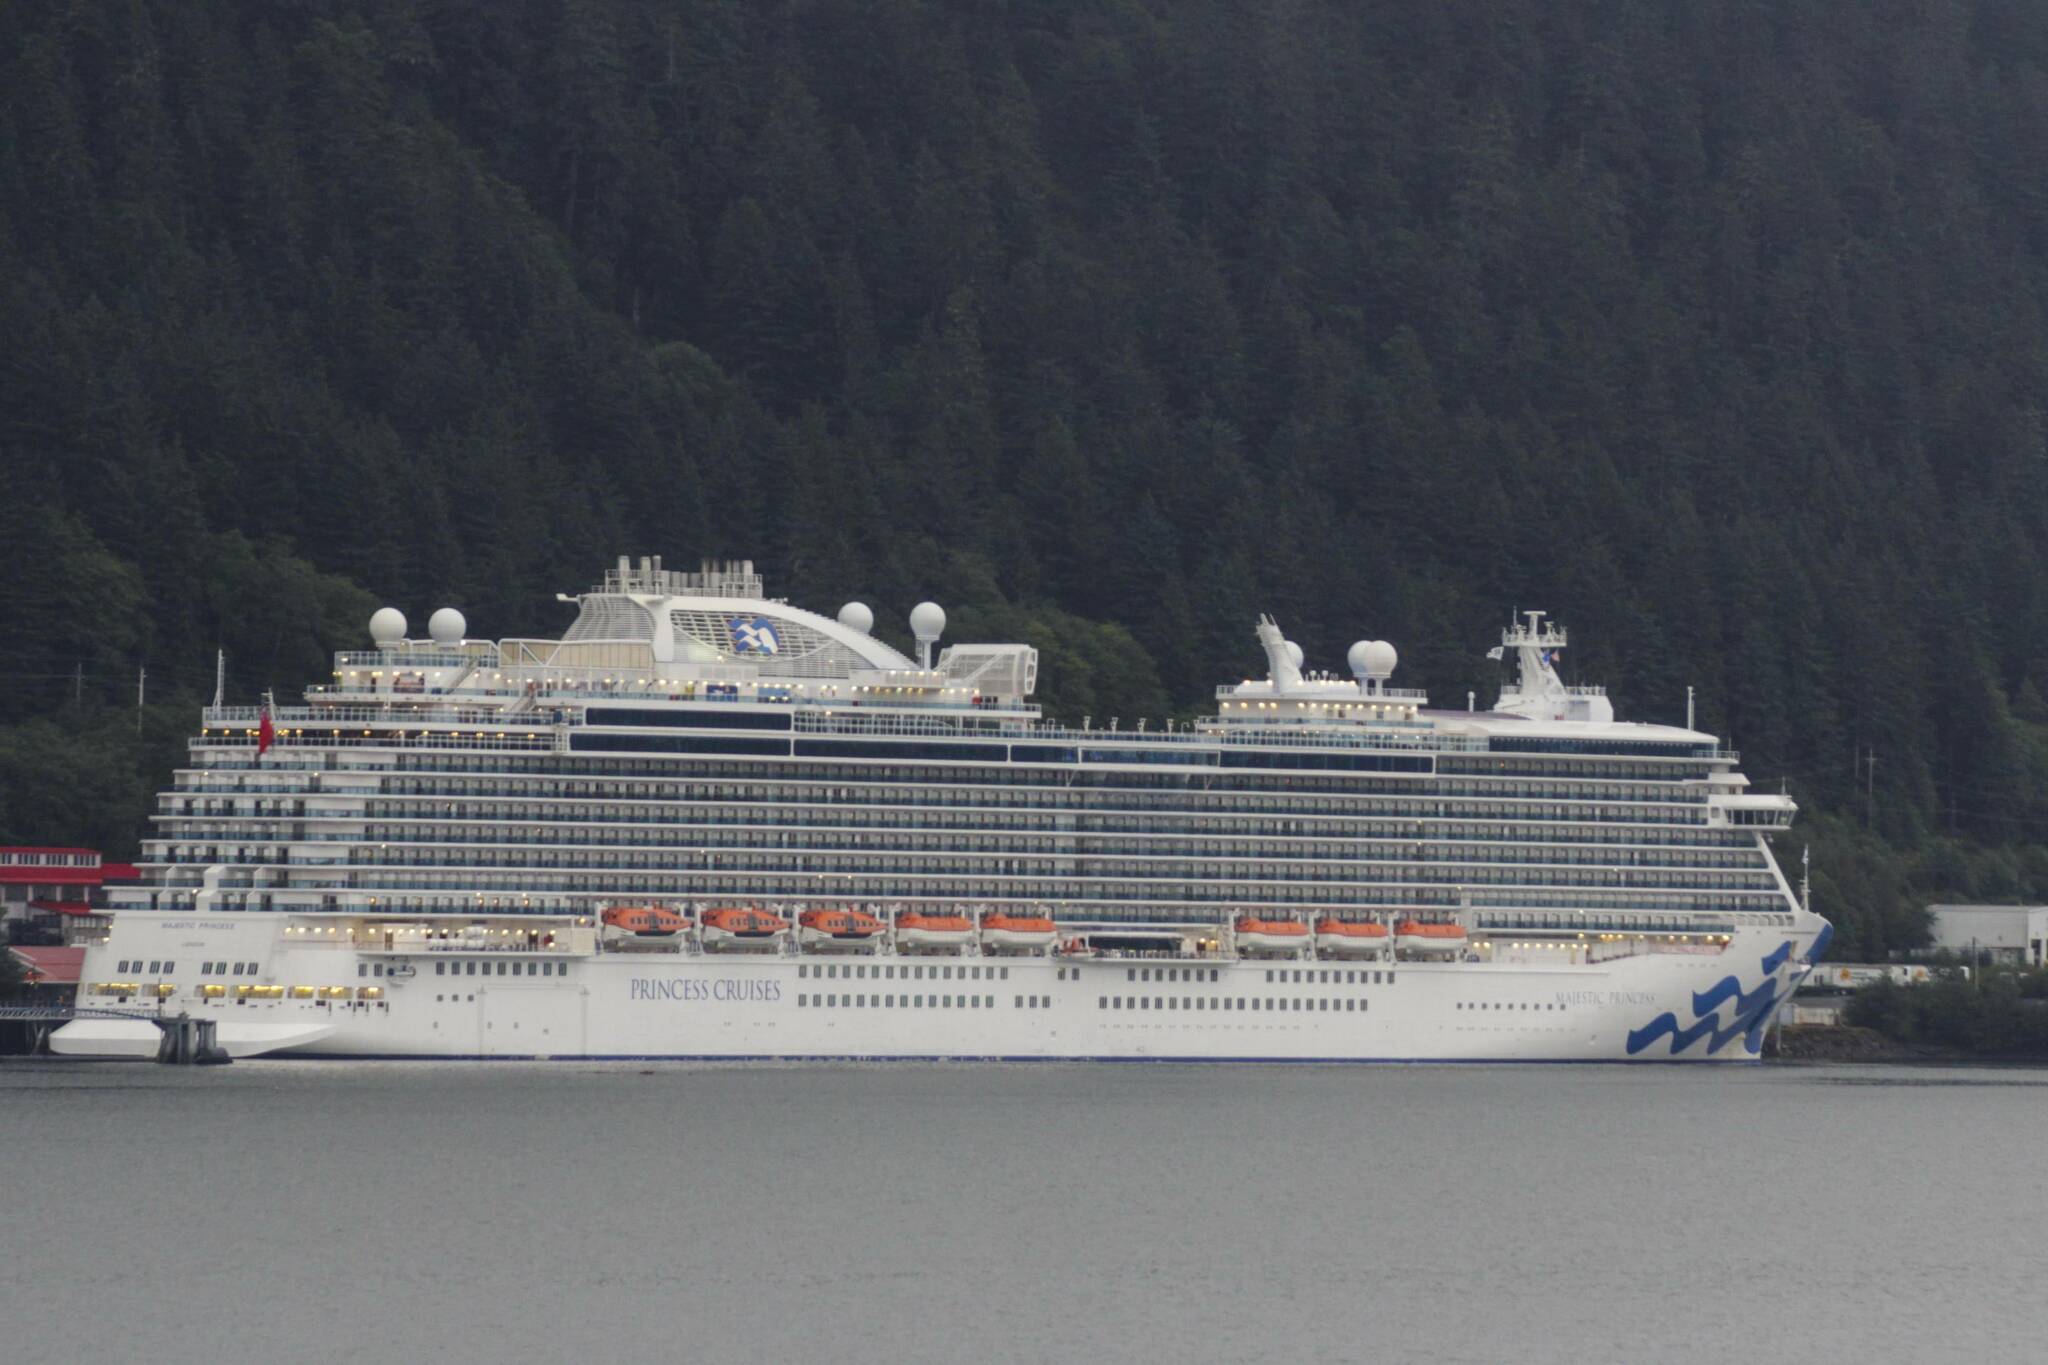 In this Empire file photo, a Princess Cruise Line ship is seen docked in Juneau on Aug. 25, 2021. The U.S. Department of Justice announced Wednesday the company pleaded guilty to violating the terms of its probabtion stemming from a 2017 conviction for illegal wastewater dumping. (Michael Lockett / Juneau Empire file)